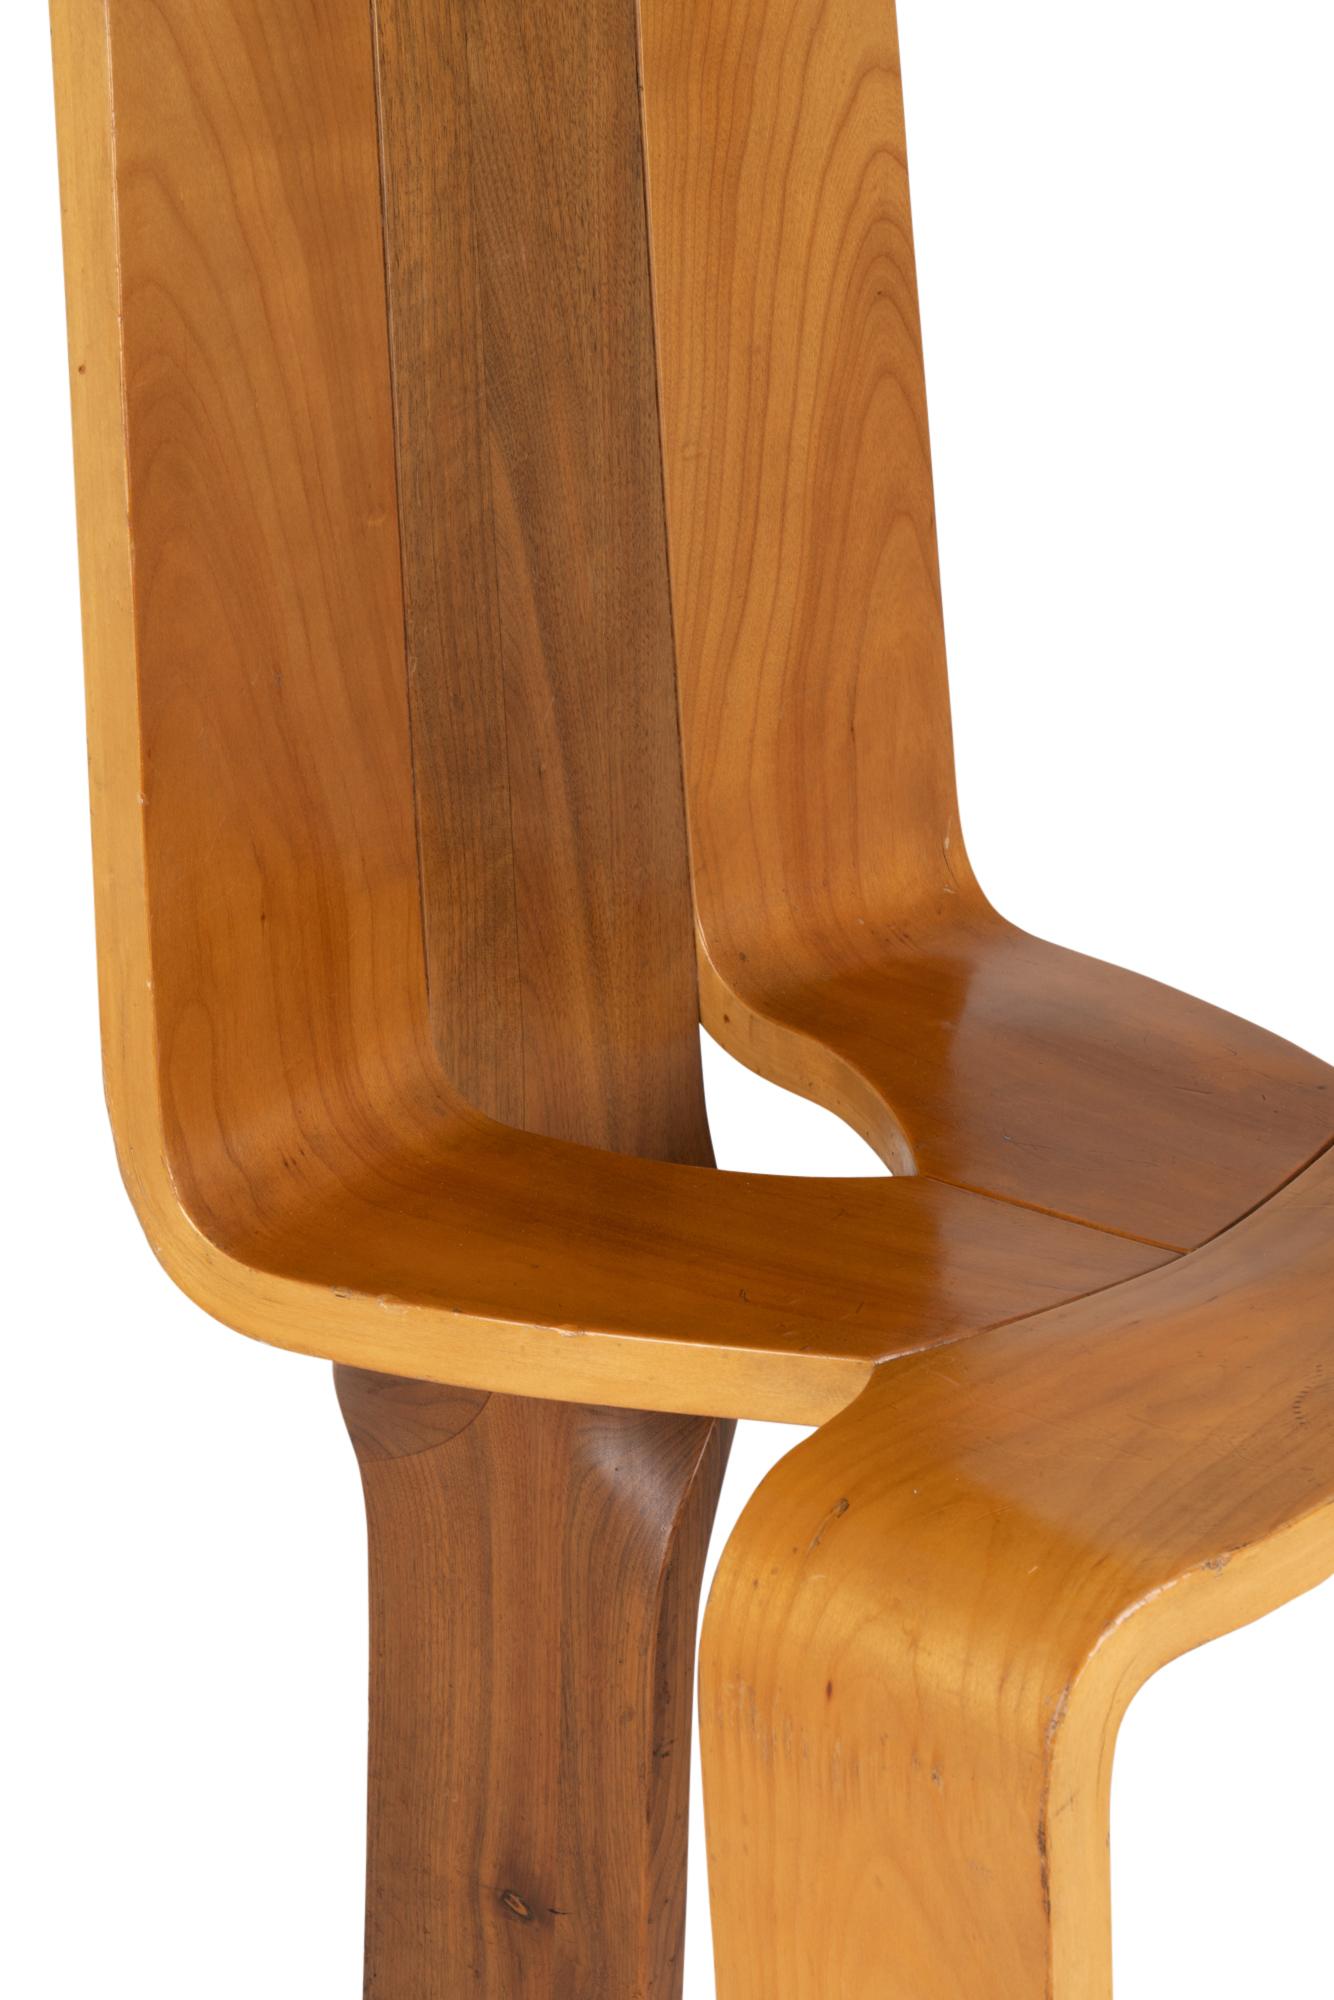 Series of Eight Chairs Blond Cherry Wood, 1980s For Sale 3